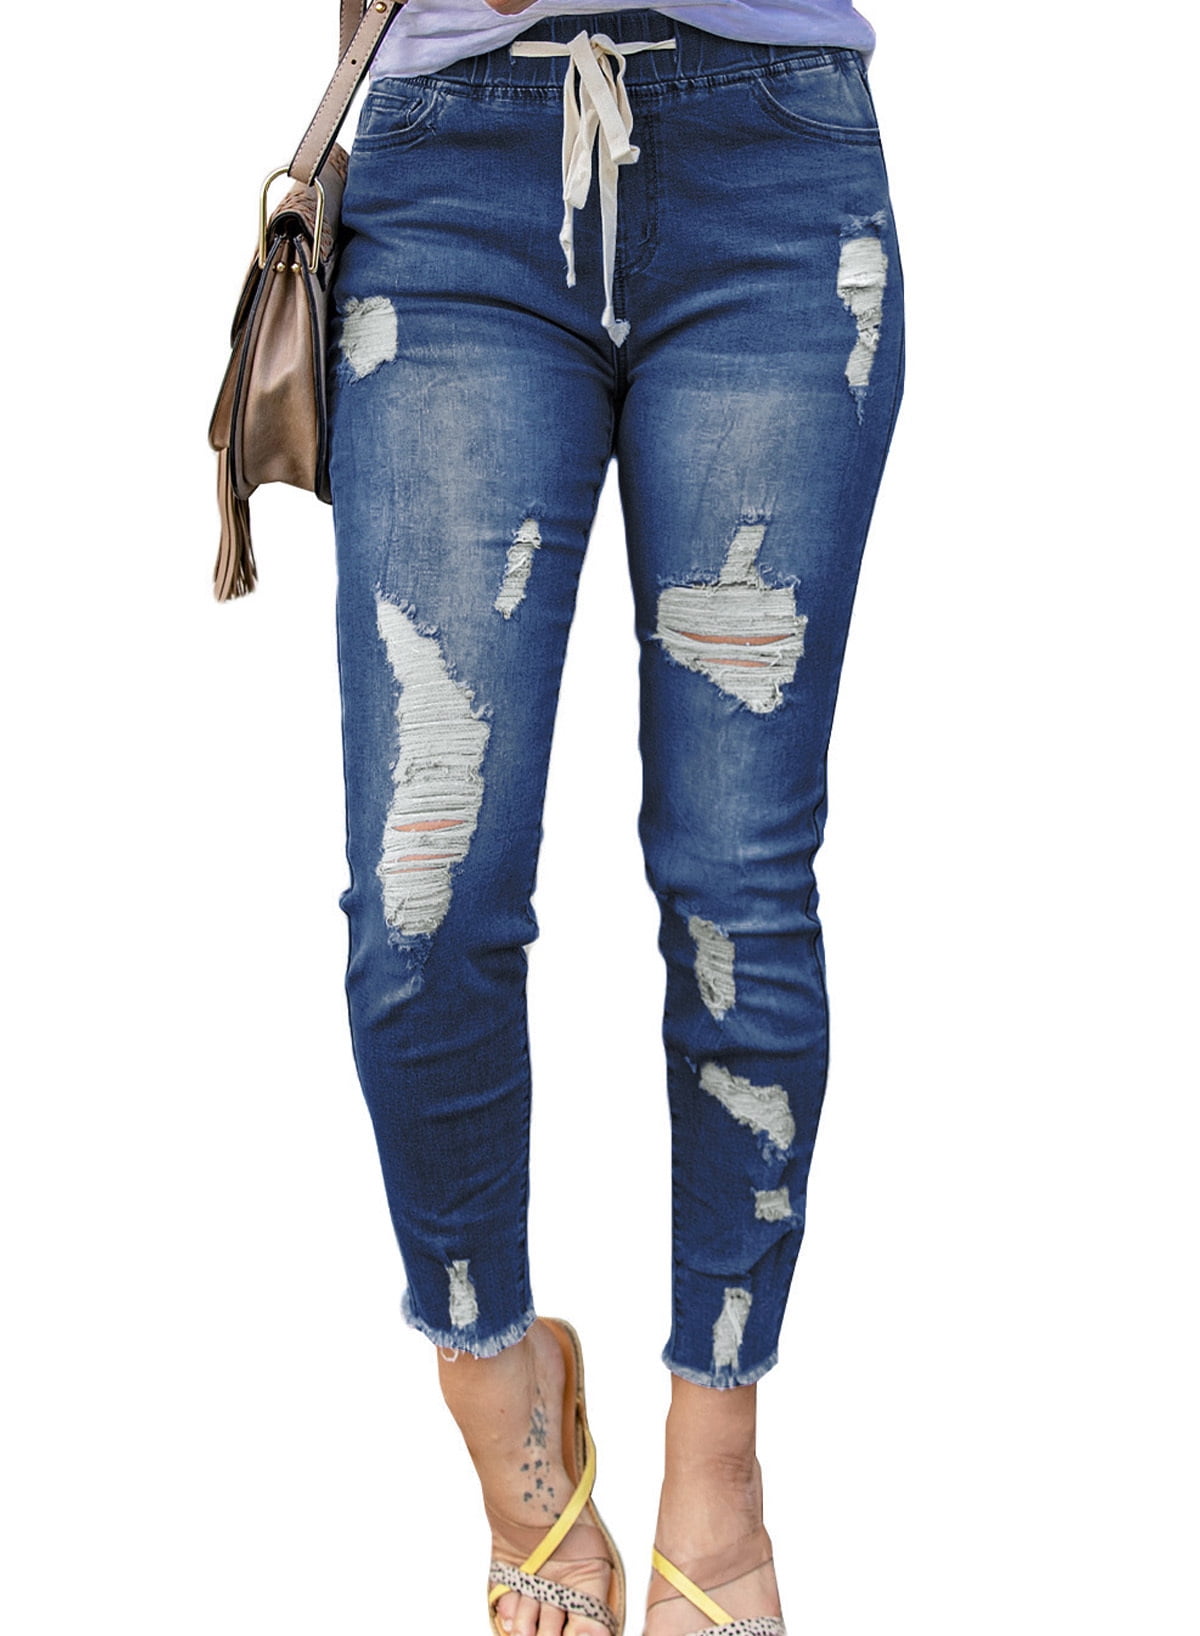 FARYSAYS Ripped Jeans for Women Skinny Jeans Stretchy Pants for Women ...